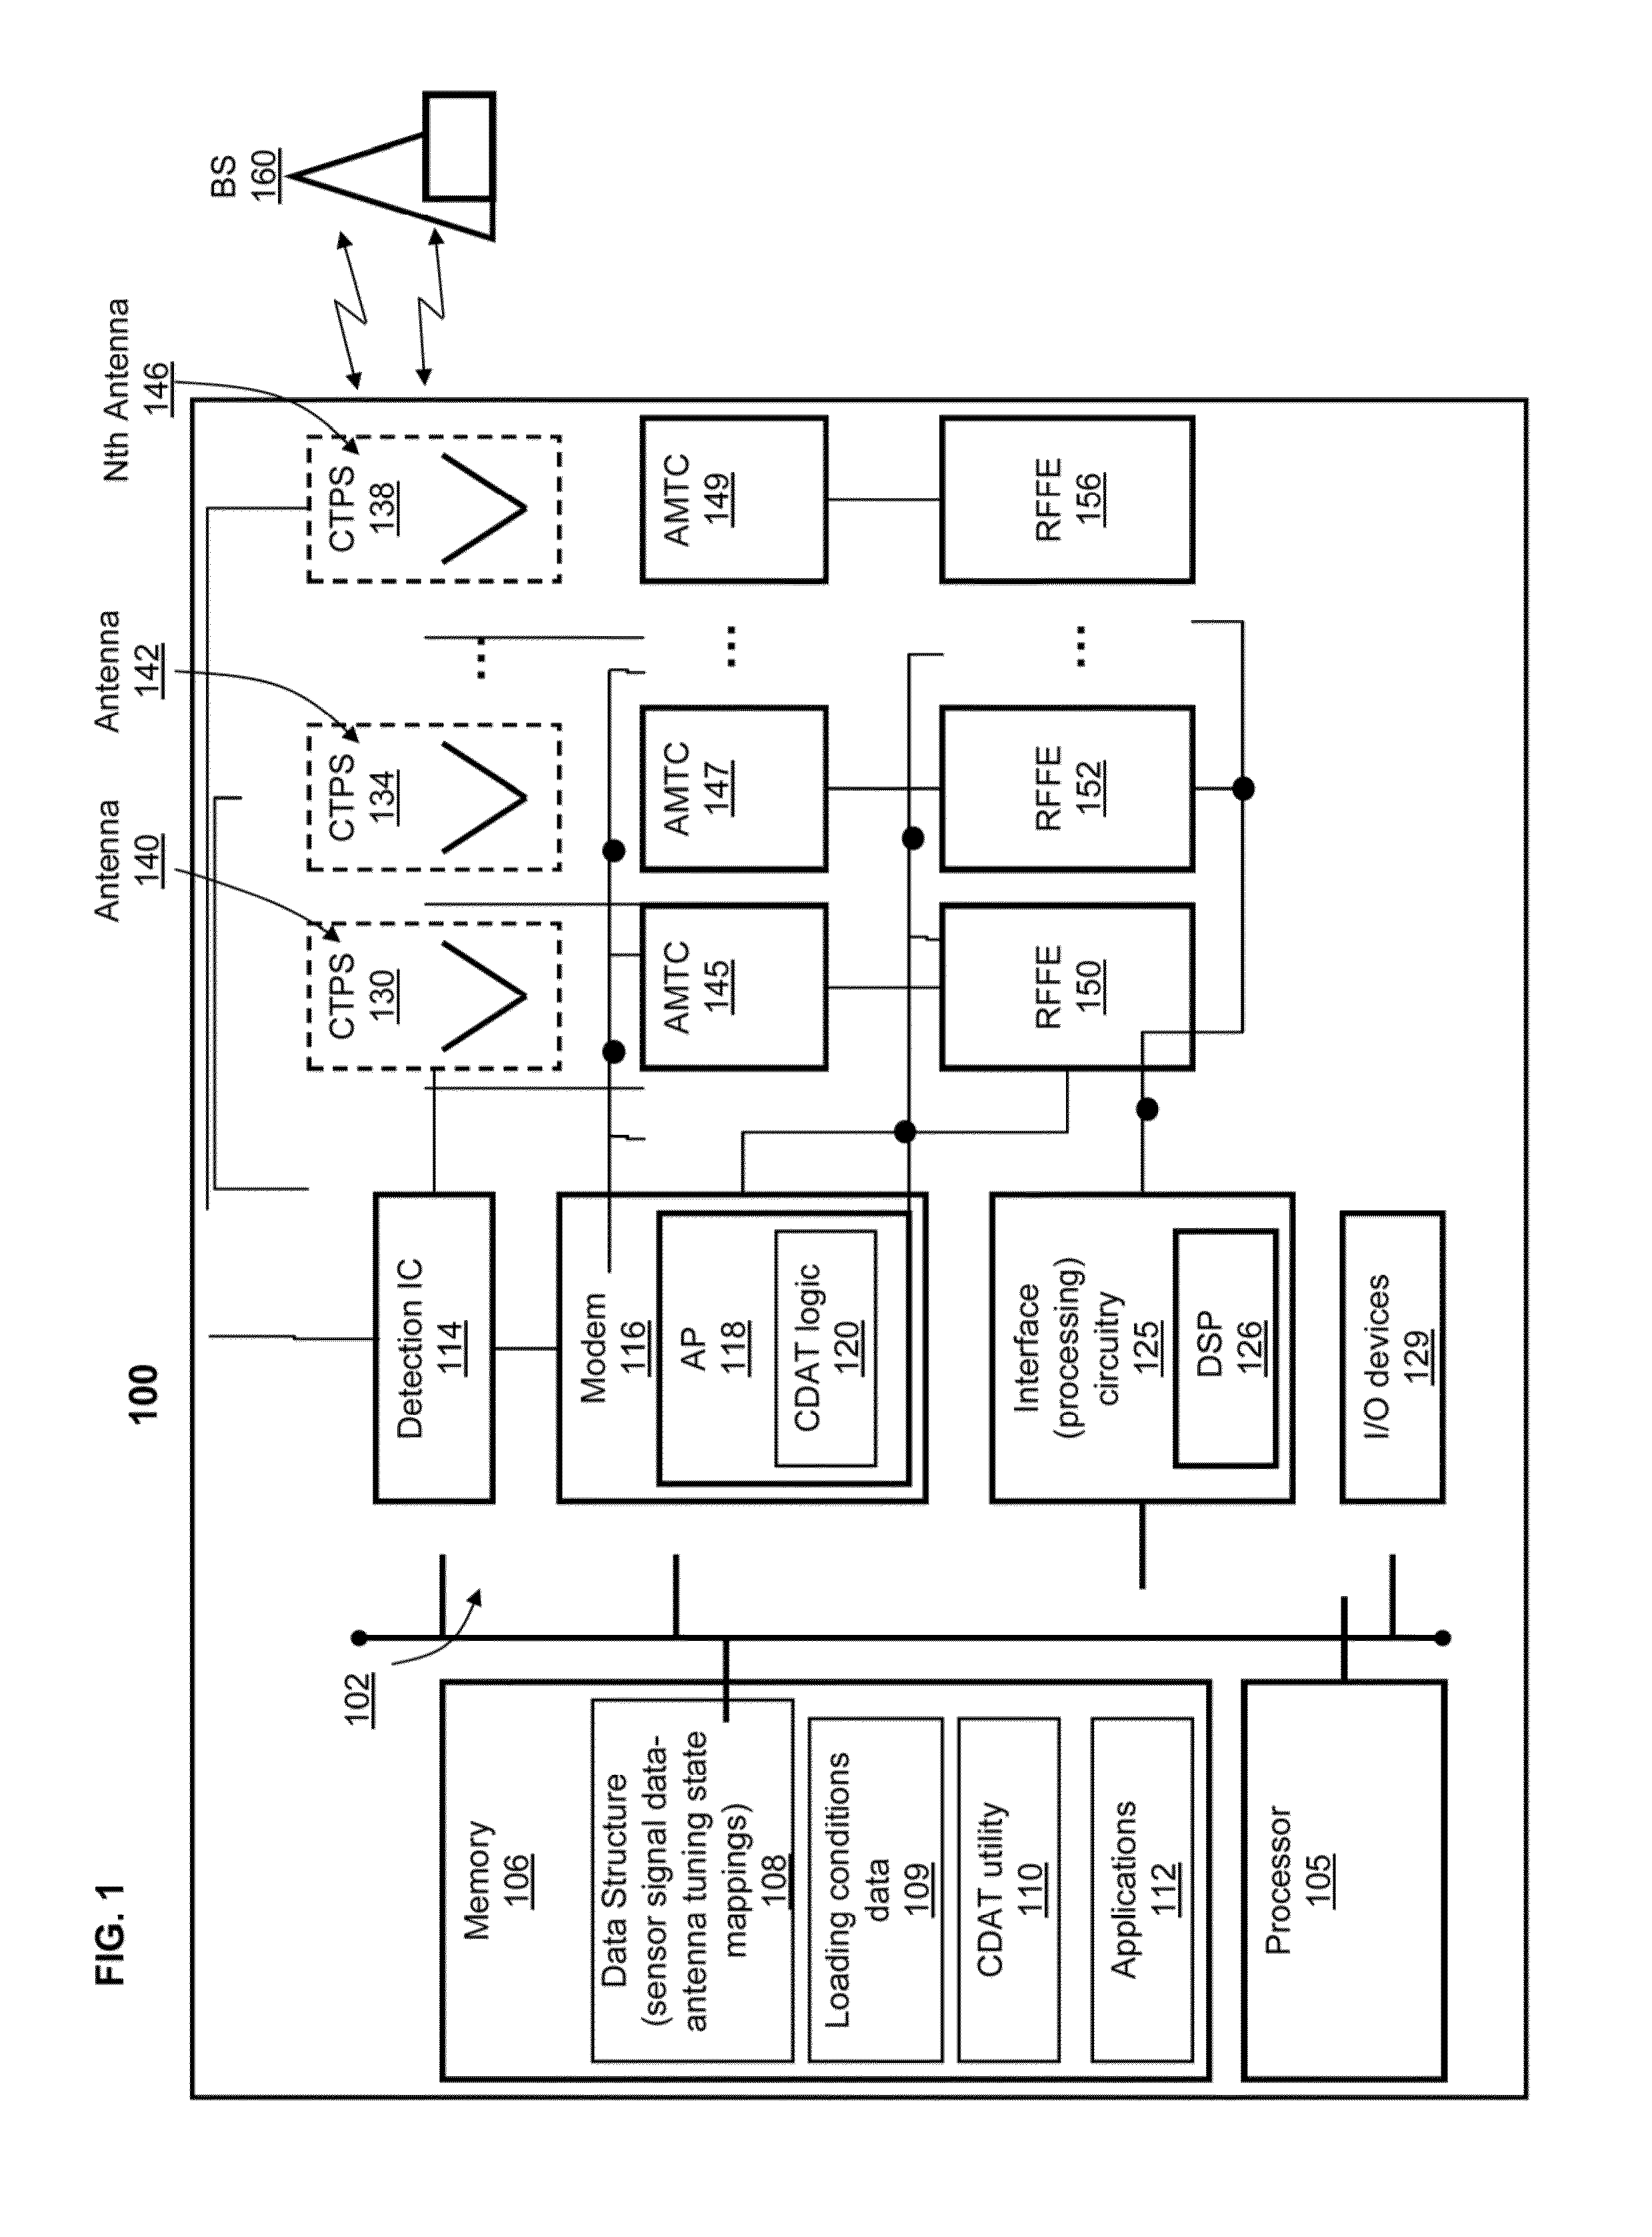 Method and wireless communication device for using an antenna as a sensor device in guiding selection of optimized tuning networks